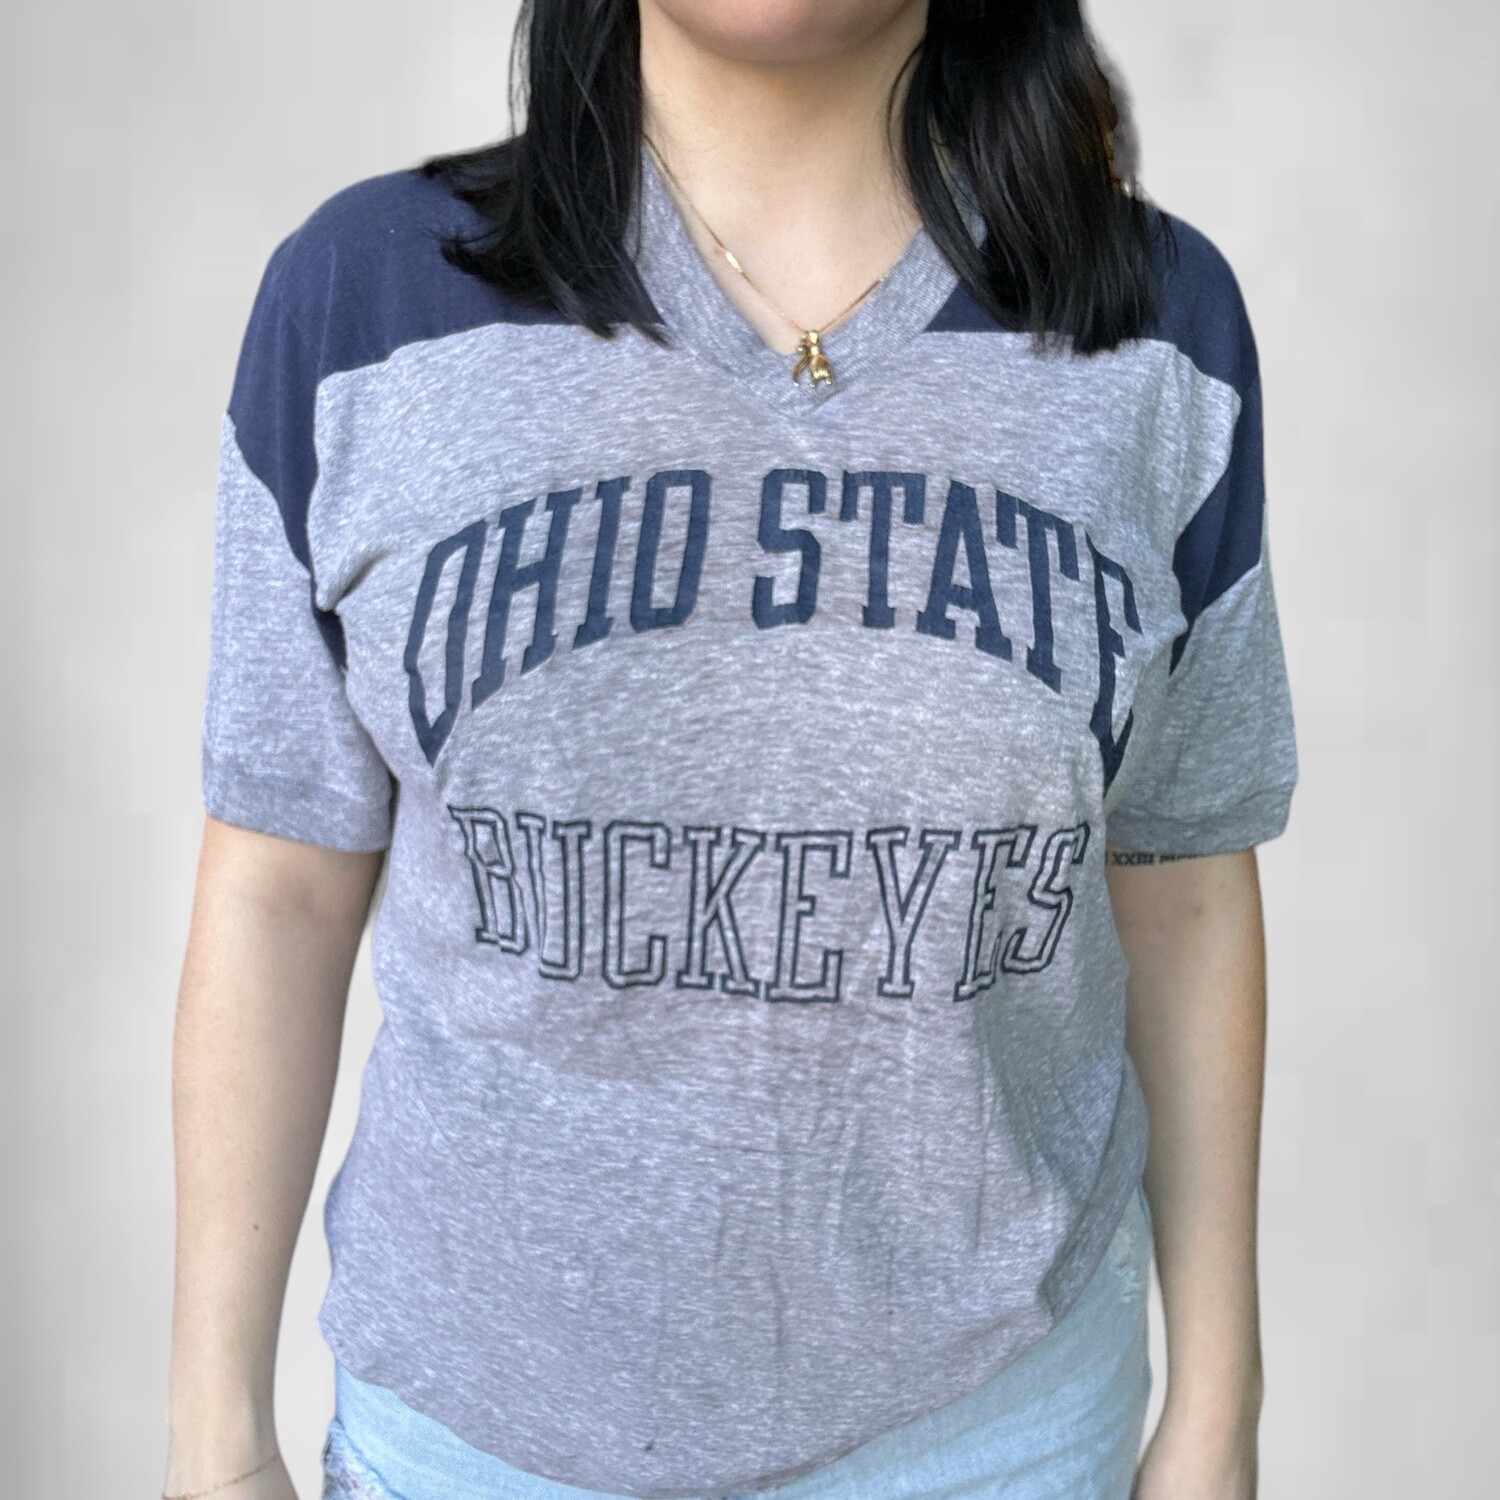 Vintage Champion 70s Ohio State Tee, Size: Large, Color: Grey, Style: College